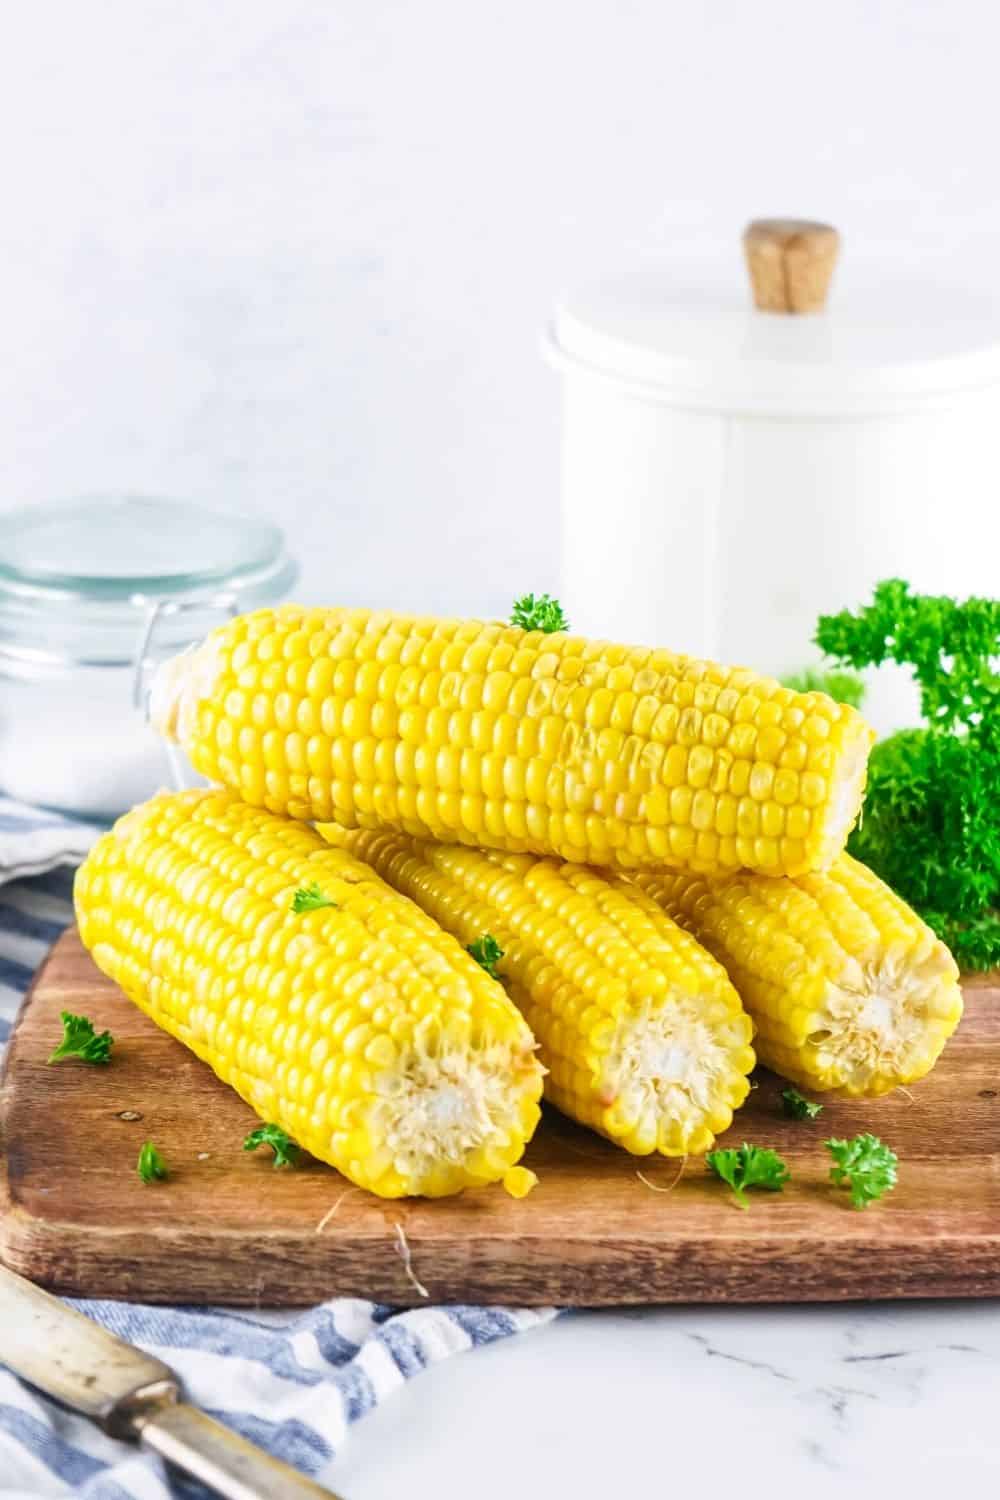 four ears of corn on the cob on a cutting board with parsley and a white canister in the background